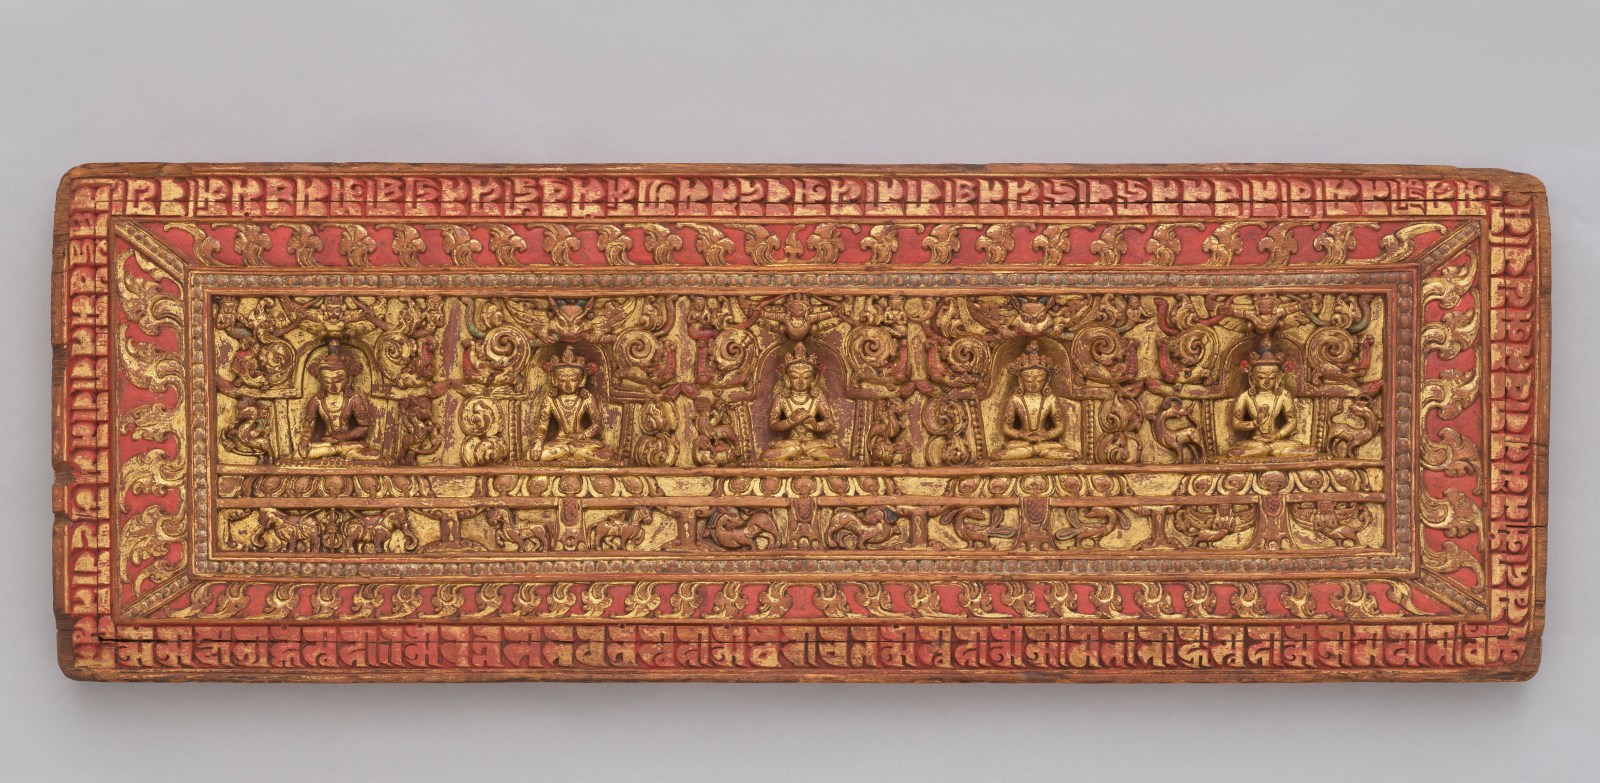 The wood panel is deeply carved on the interior side with the five Tathagatas—Vairocana at the center flanked by Amitabha and Akshobhya, with Amoghasiddhi and Ratnasambhava at either end.